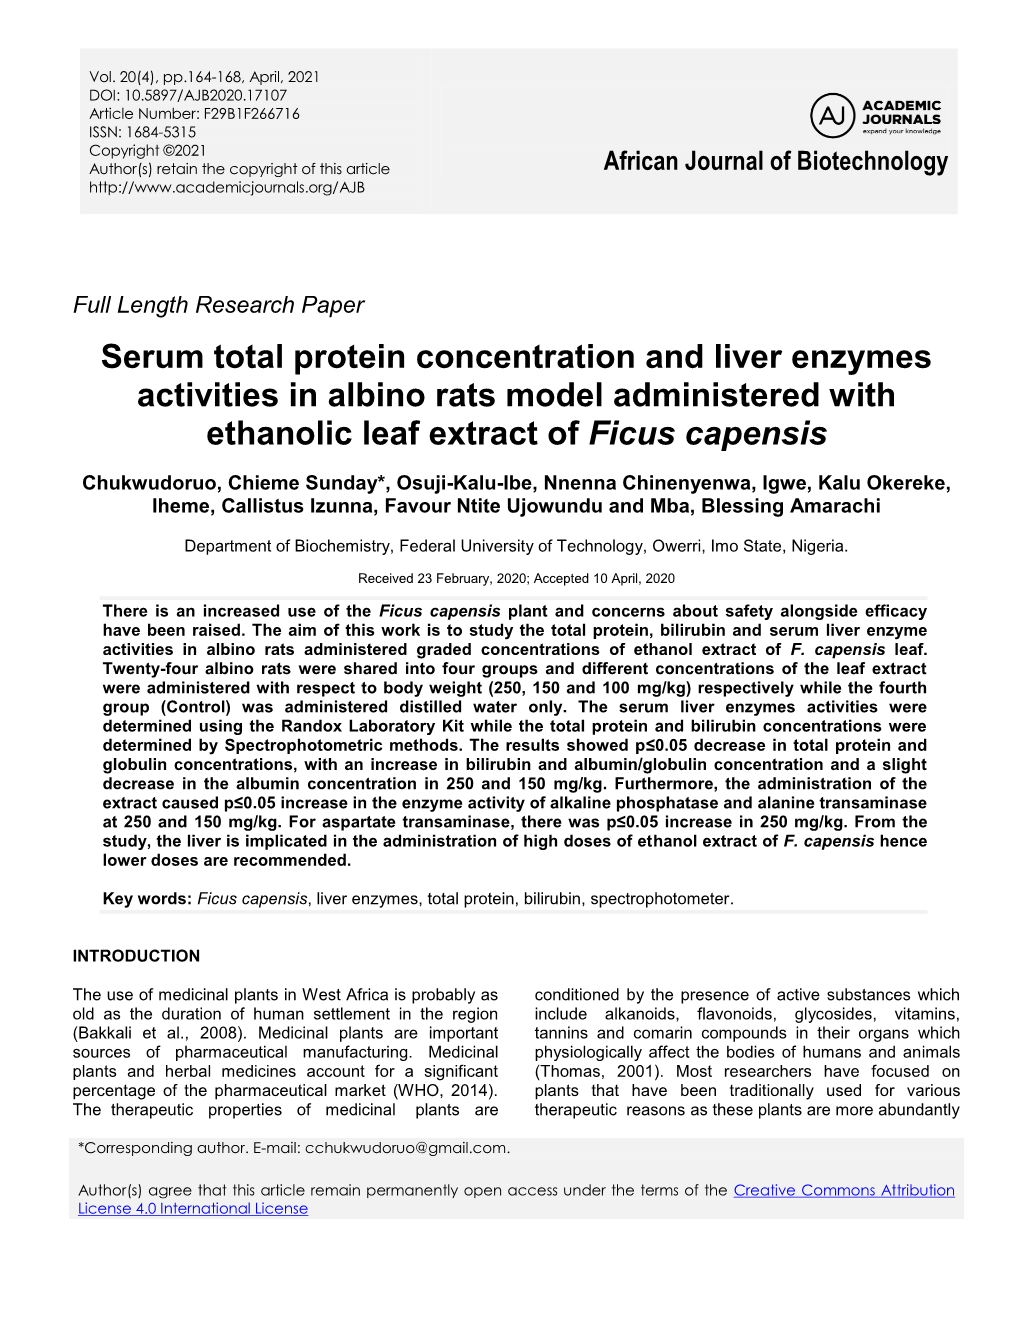 Serum Total Protein Concentration and Liver Enzymes Activities in Albino Rats Model Administered with Ethanolic Leaf Extract of Ficus Capensis